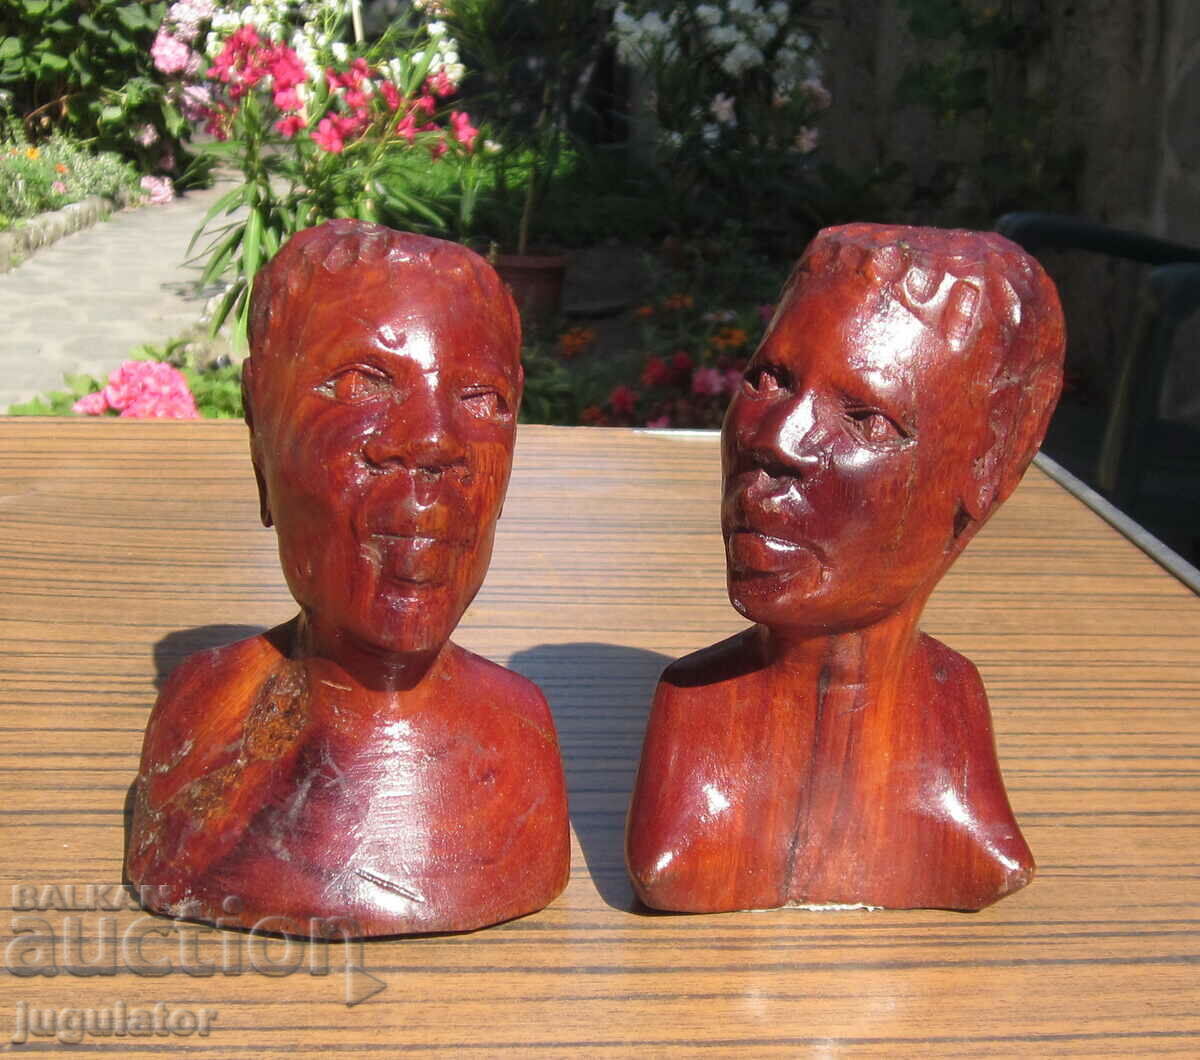 set of old wooden figures statuettes man and woman